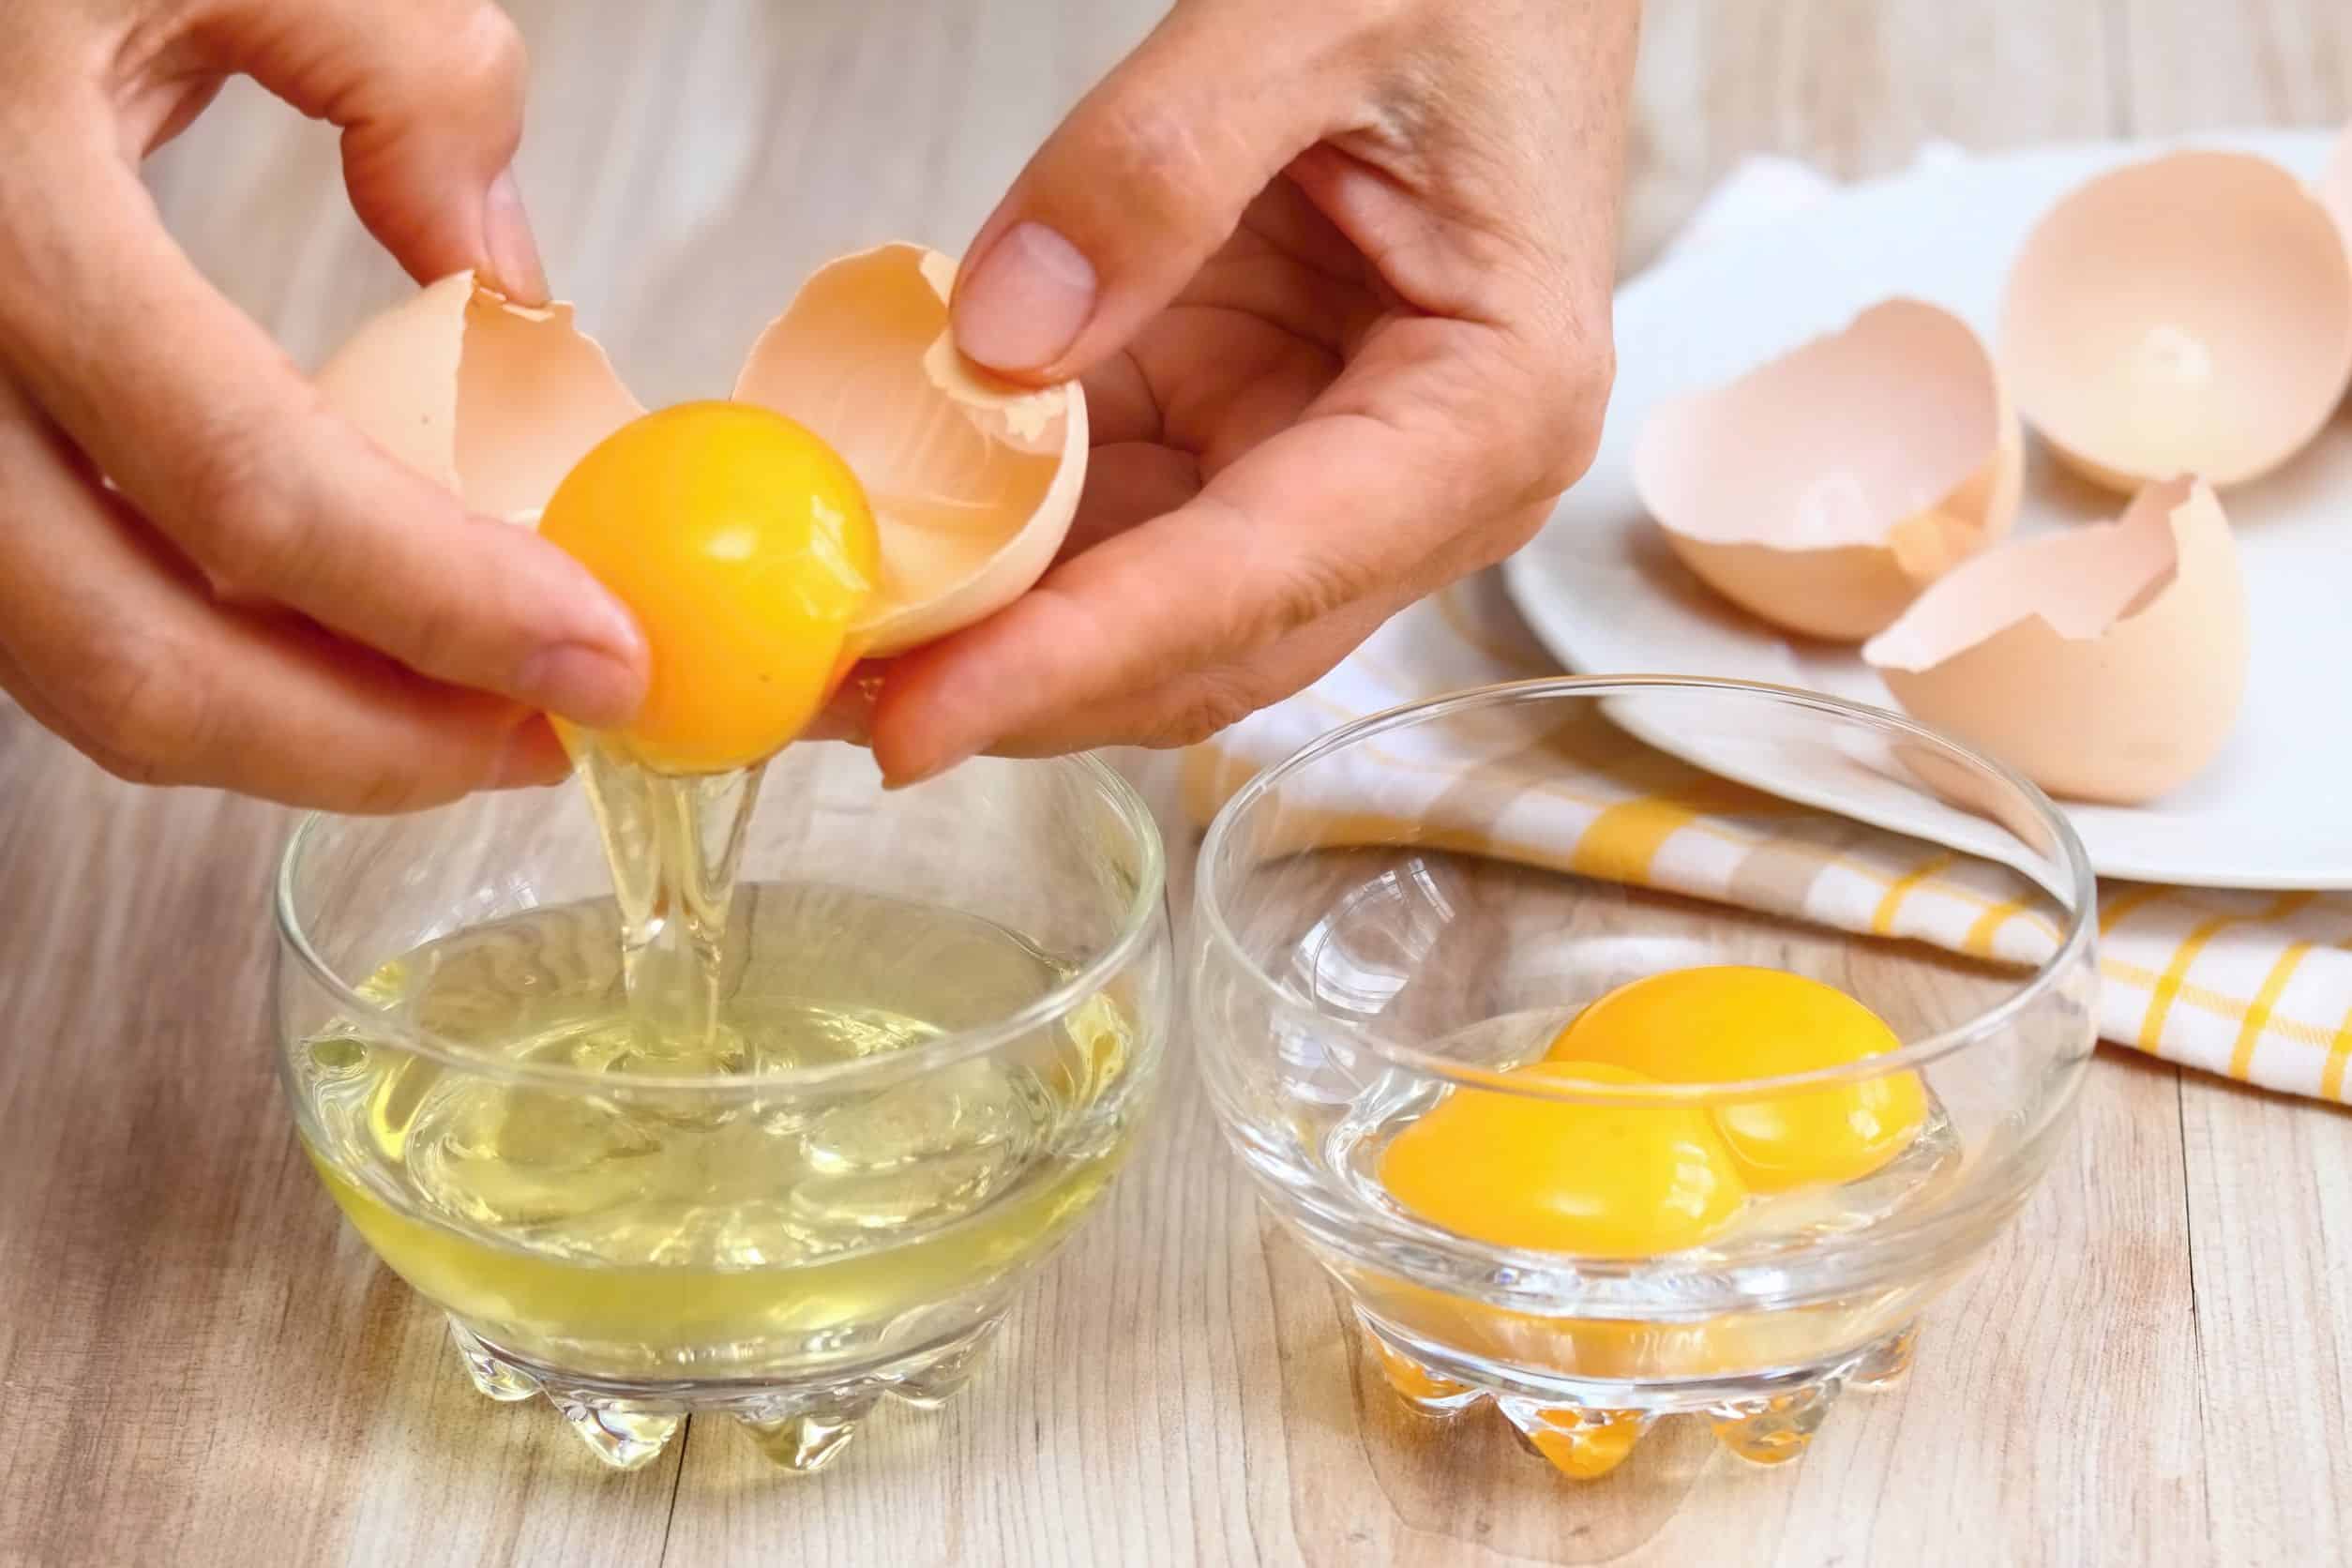 Eggs and Diabetes: Beneficial or Harmful for Diabetes